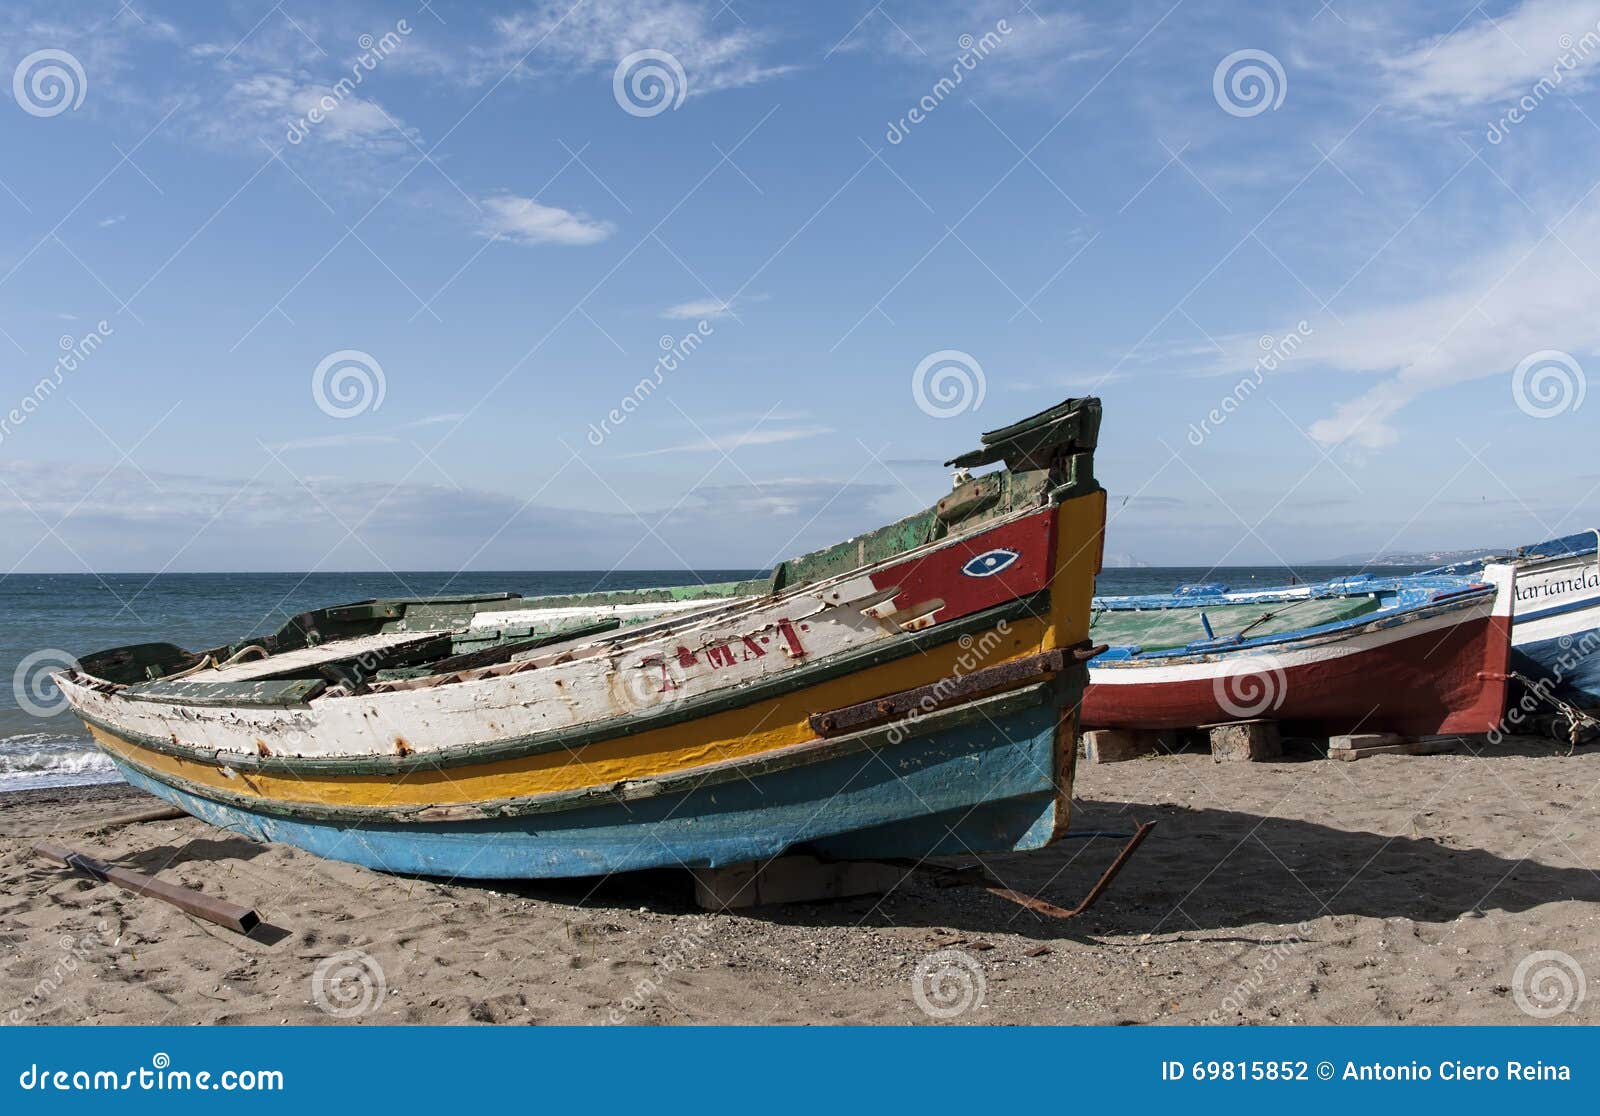 Fishing Boats on the Shore of a Beach on the Mediterranean Sea